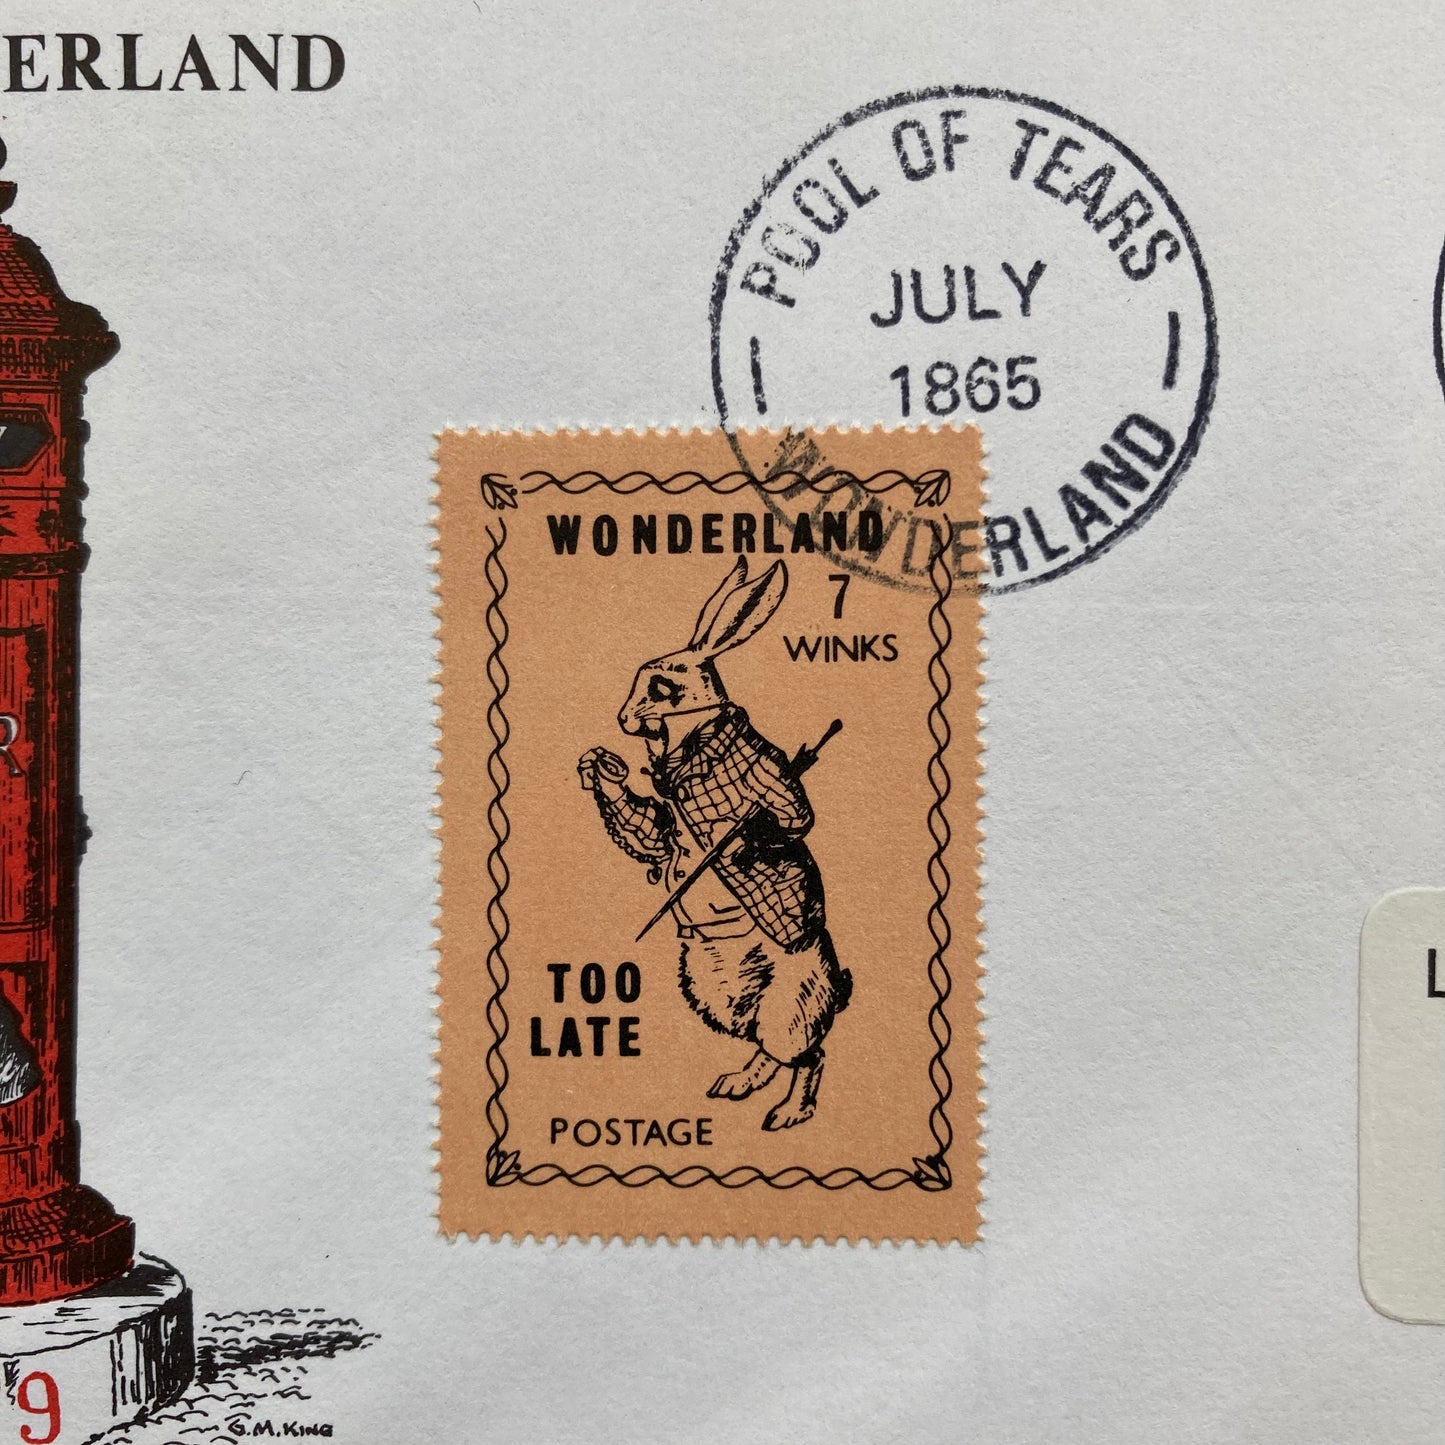 Alice in Wonderland First Day Covers (1979)